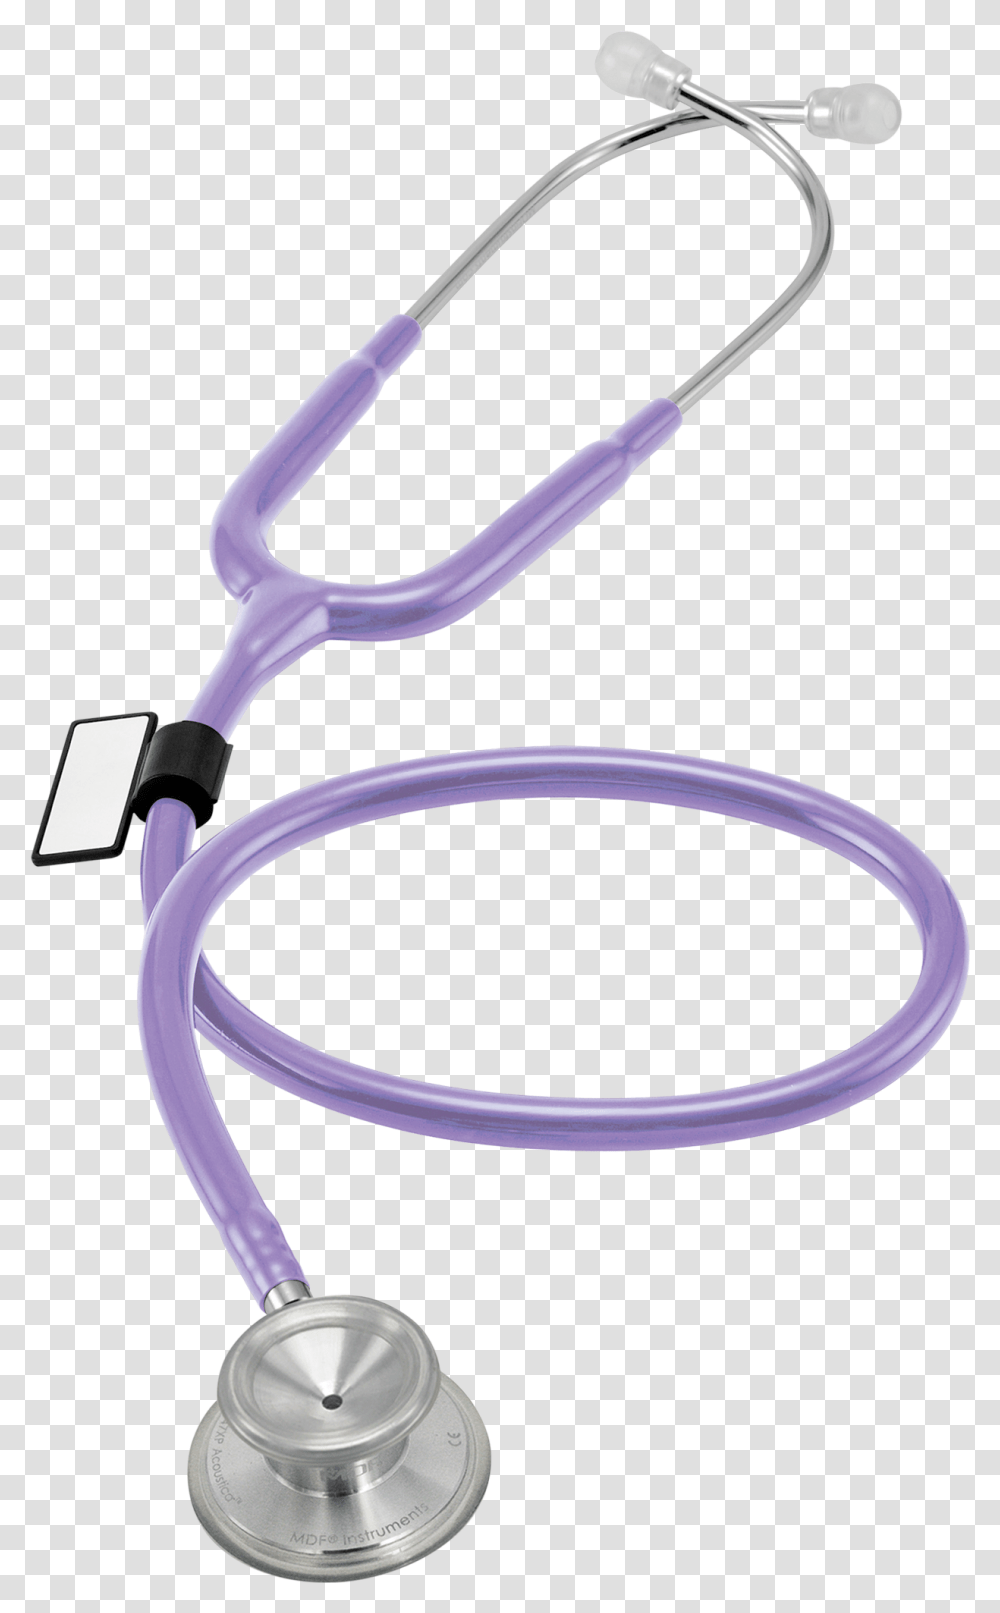 Stethoscope Pics Posted By Ethan Simpson Mdf Stethoscope Black Rose Gold, Bracelet, Jewelry, Accessories, Accessory Transparent Png